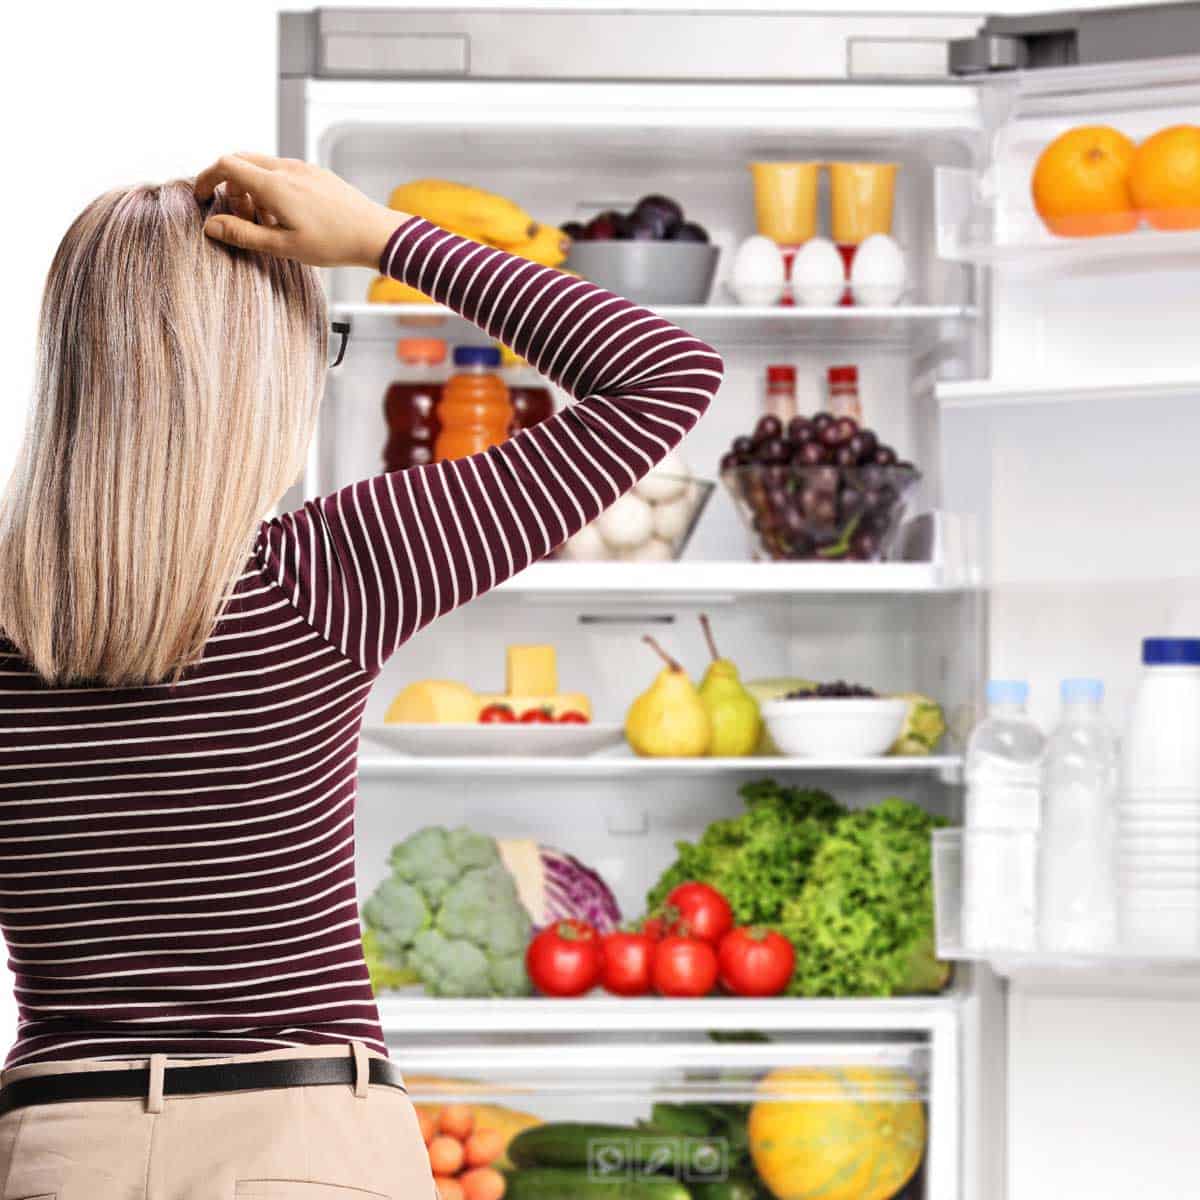 Woman standing at the open door of the fridge looking at the items on each shelf.